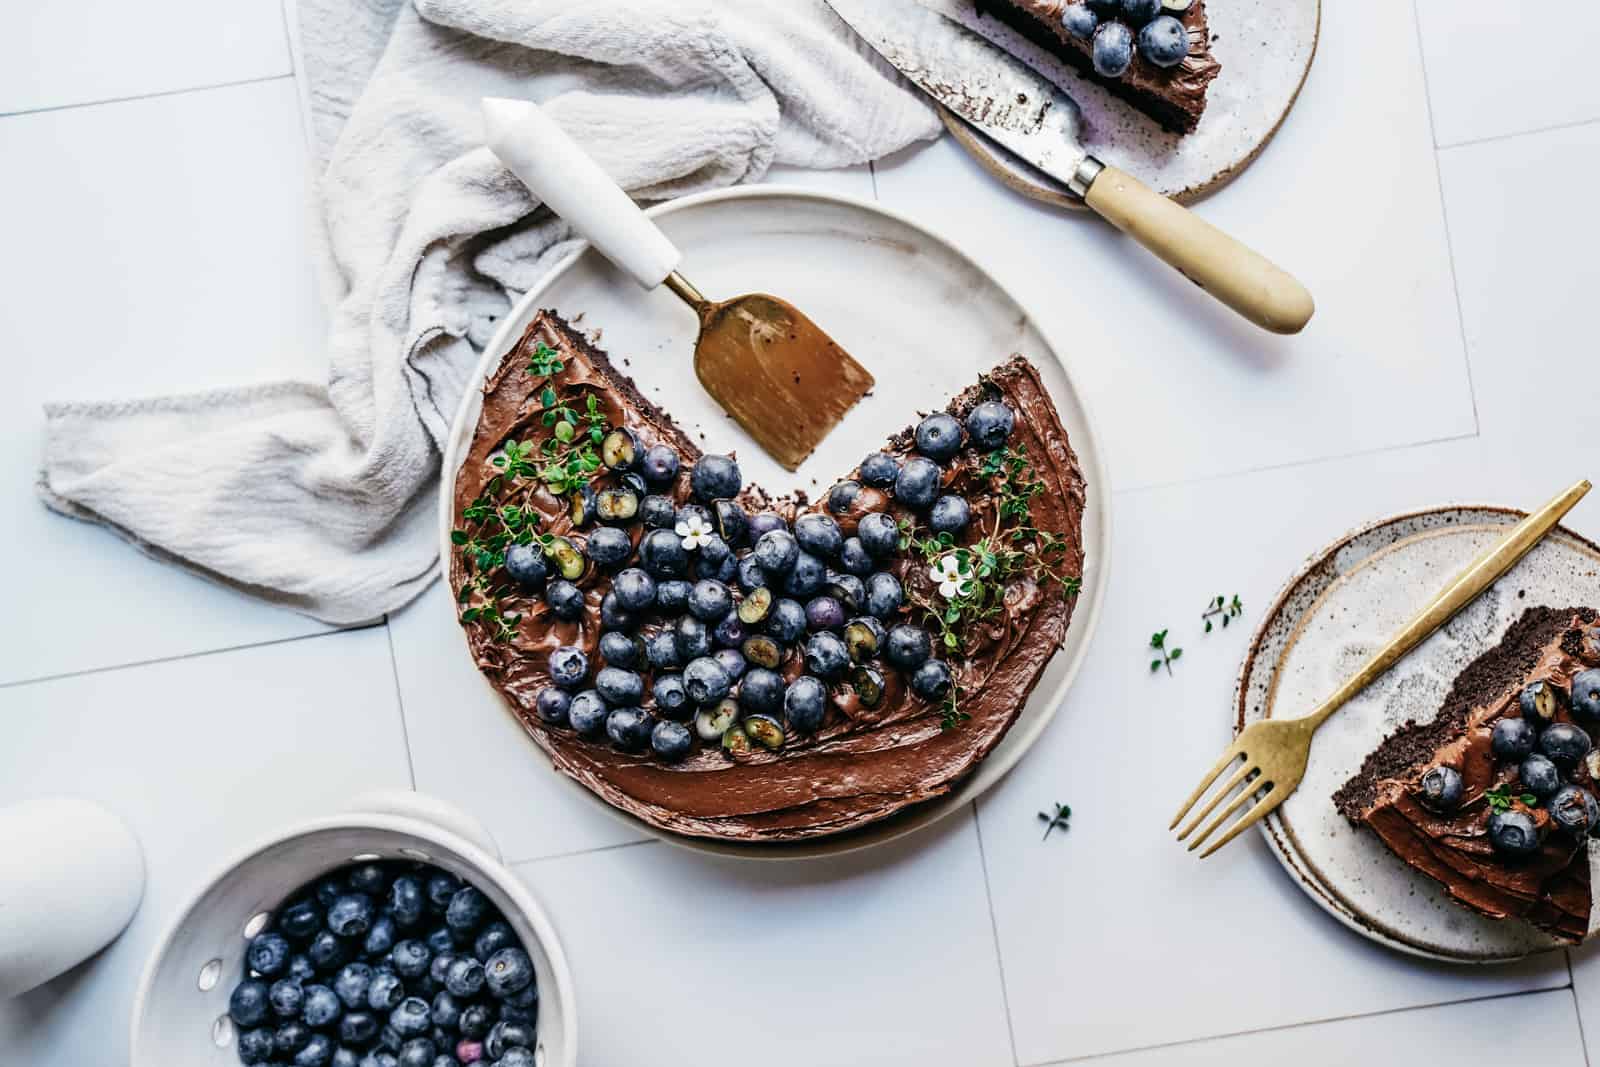 A chocolate cake with blueberries on the counter to demonstrate Maria's top food photography tips.